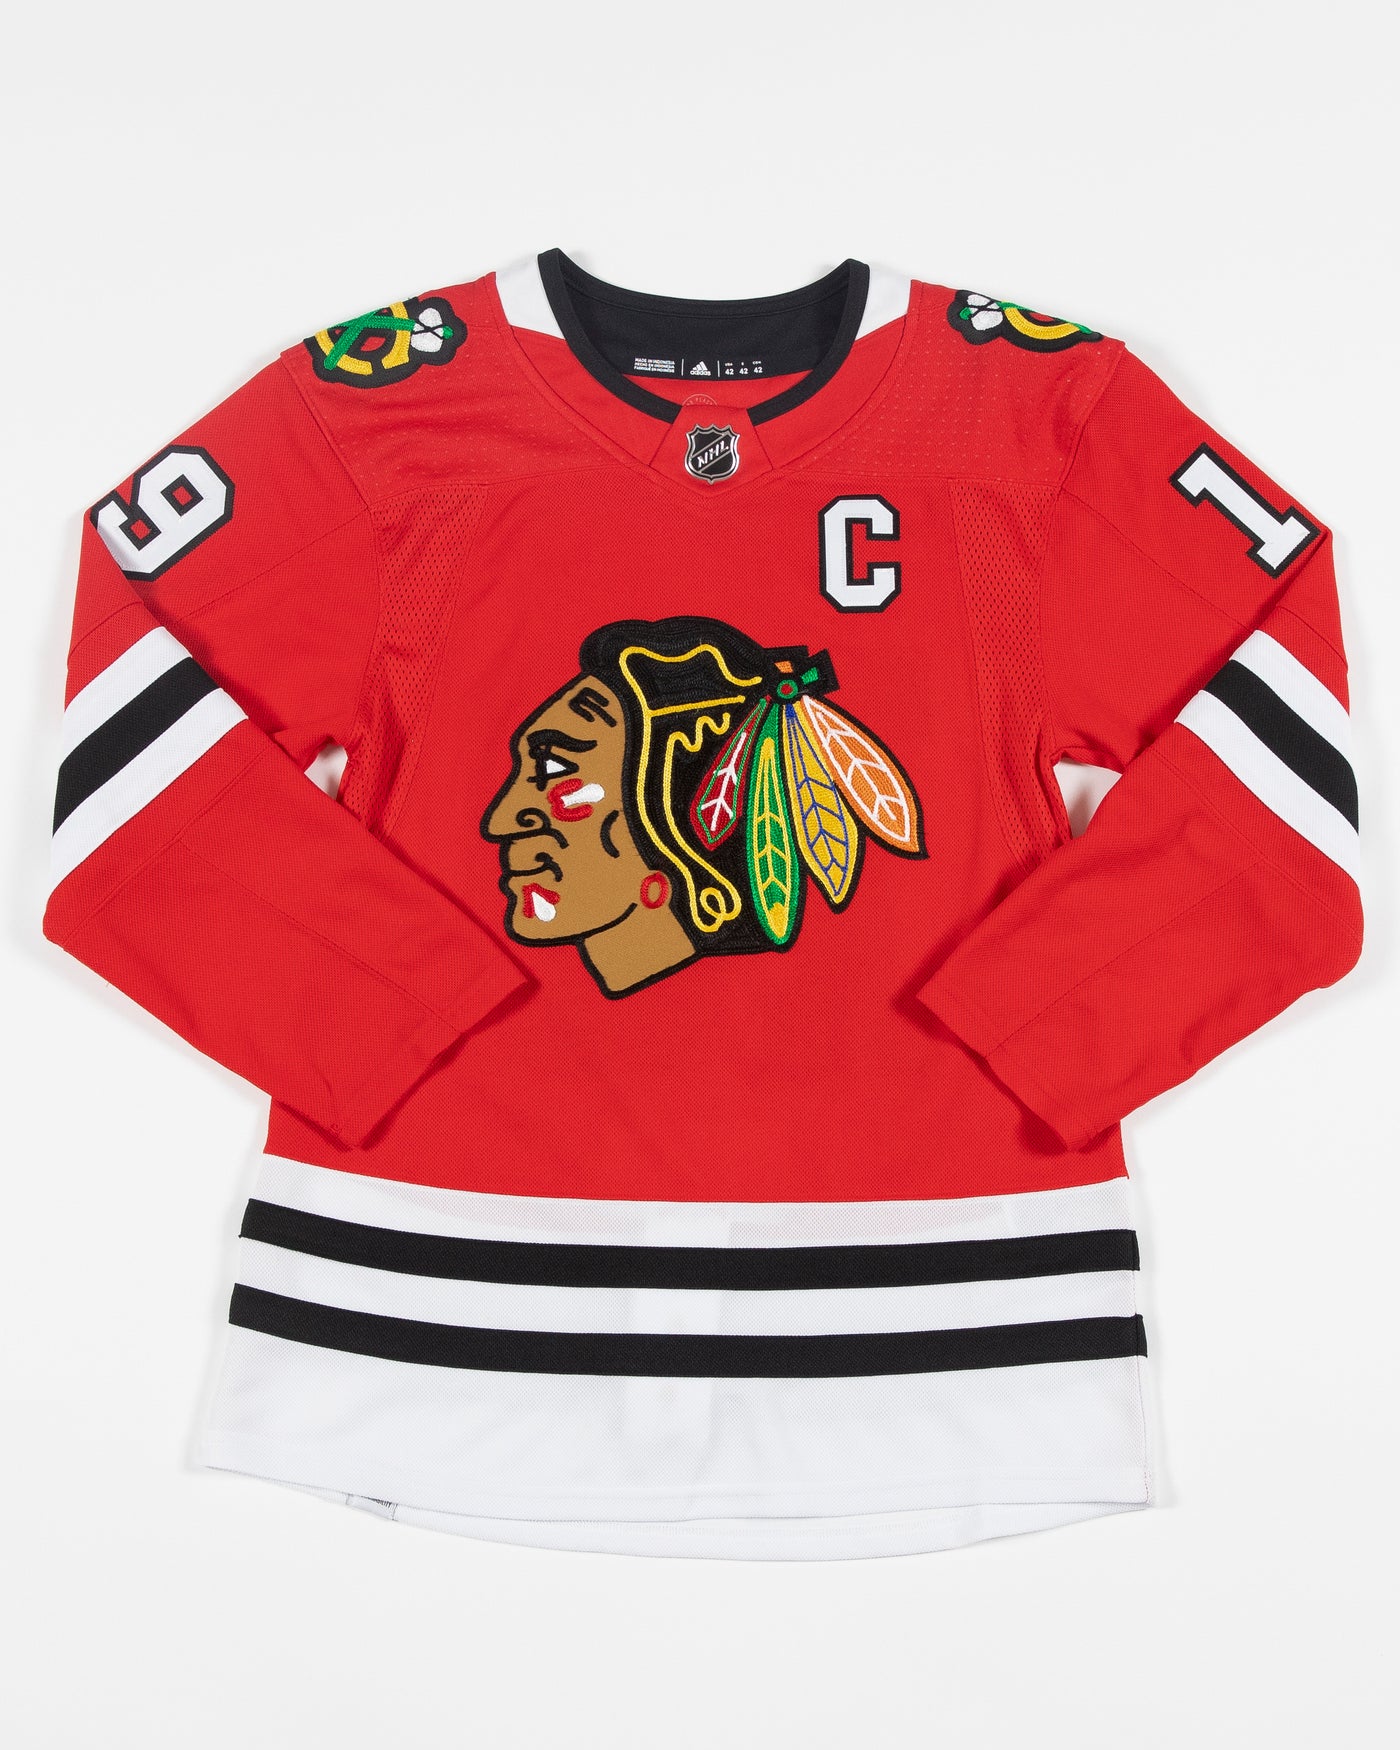 NHL shop is selling Reebok Edge 2.0 authentics (size 56 and up